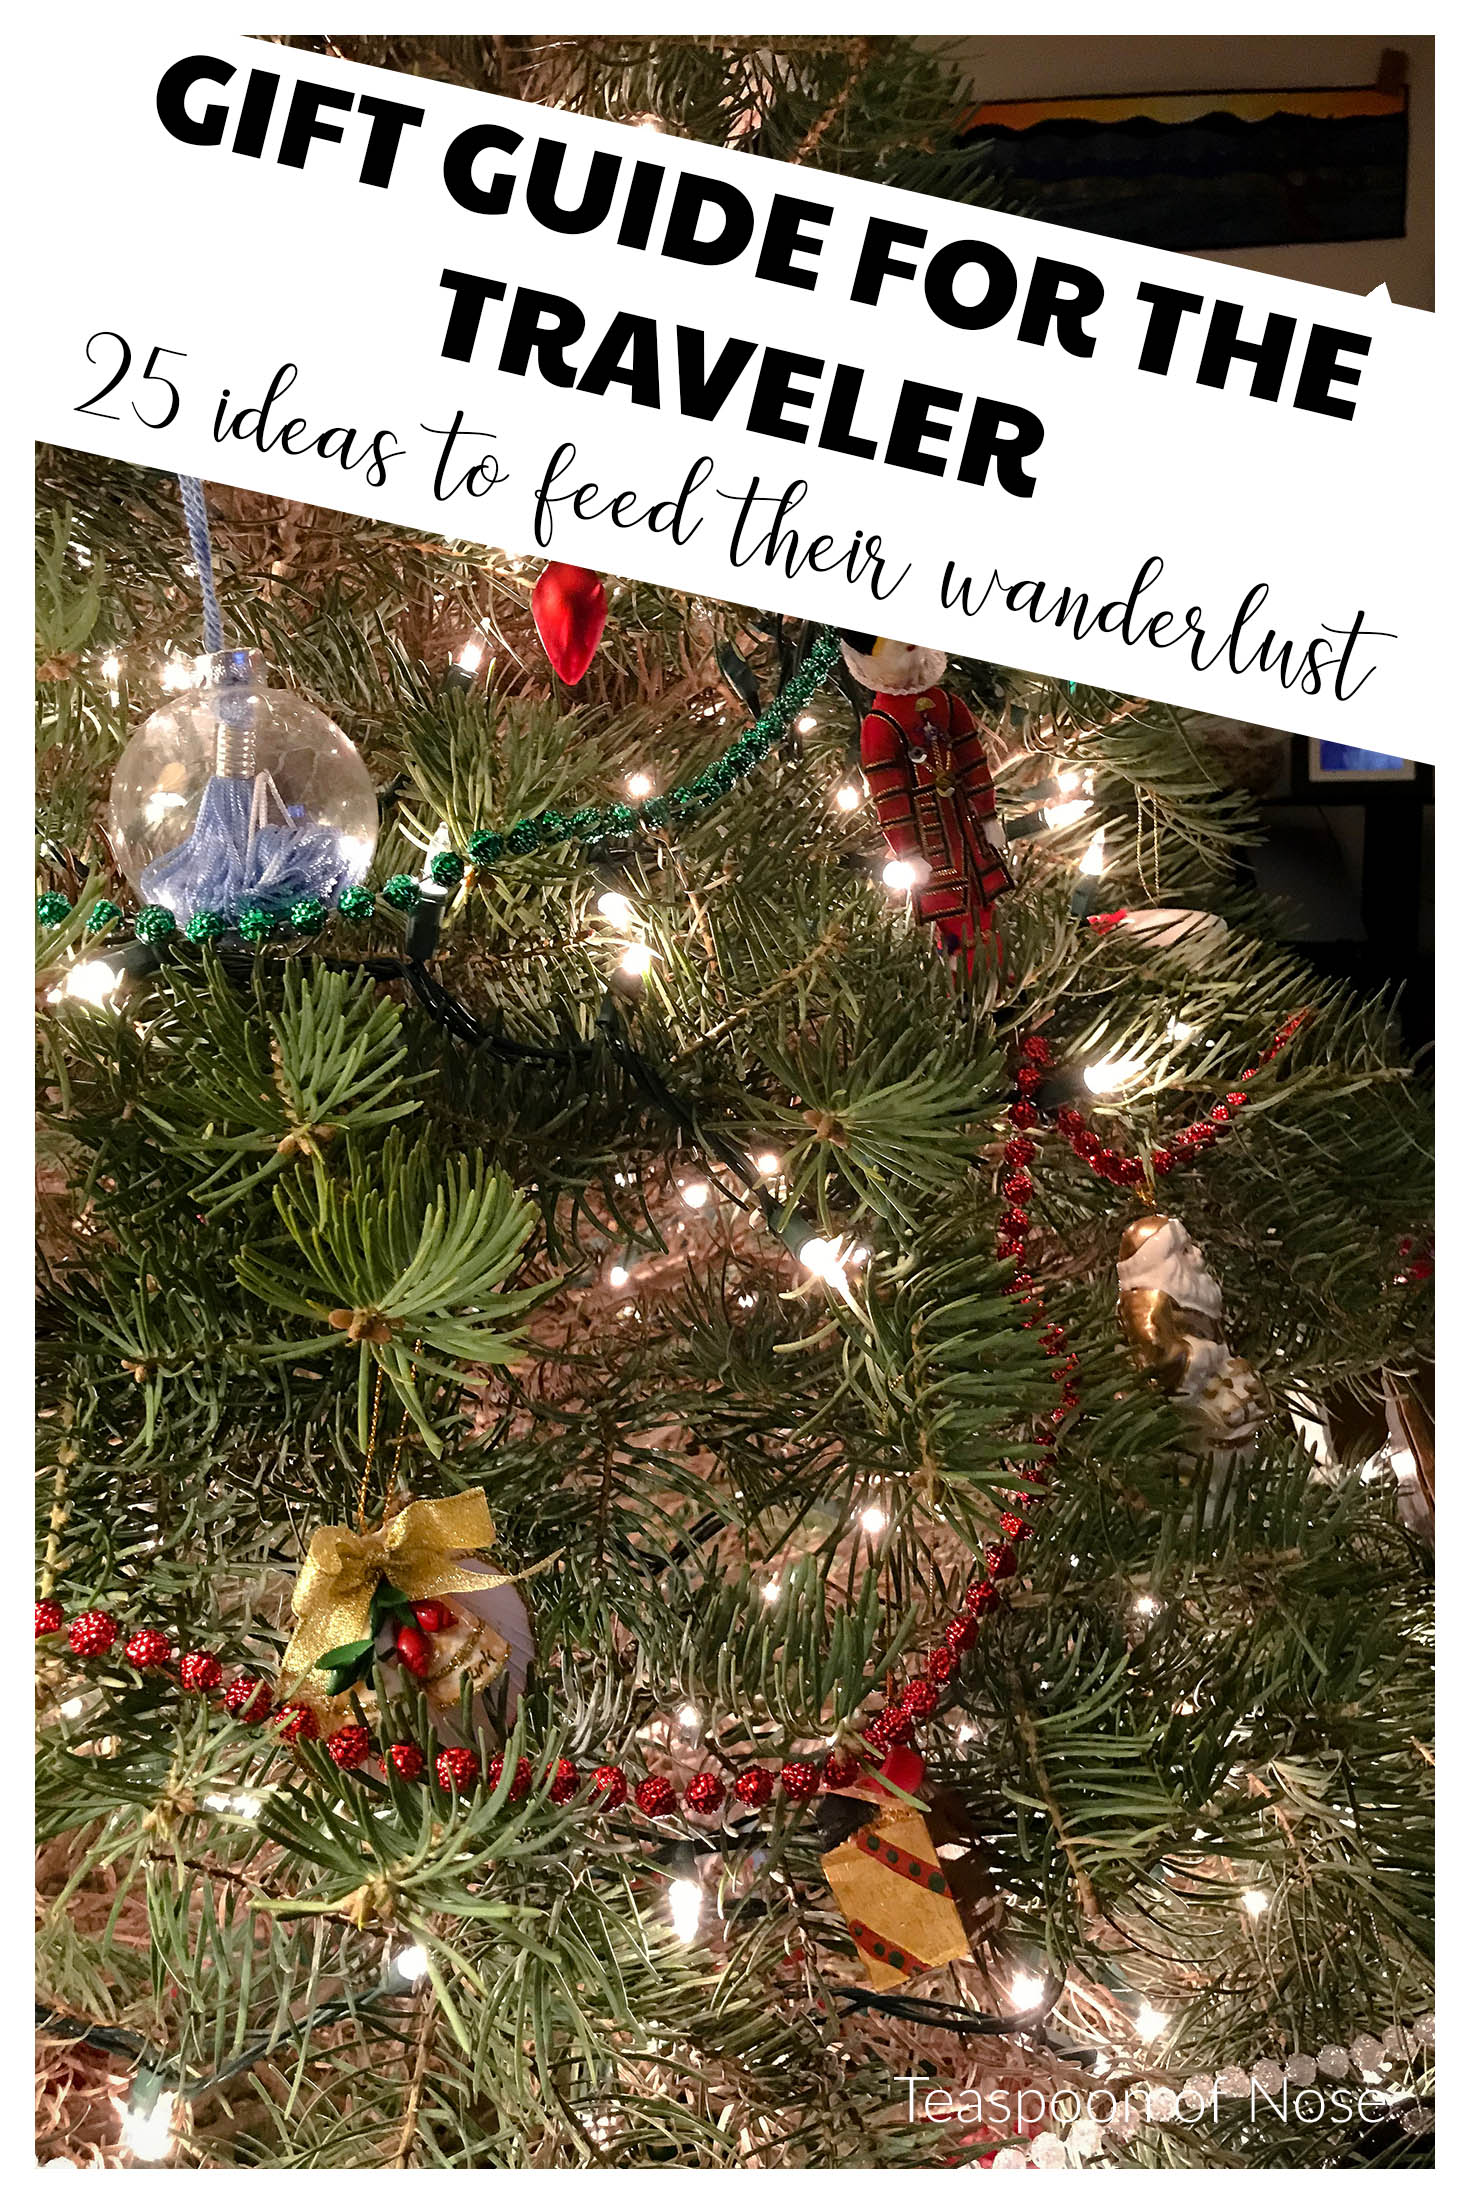 gift guide for the traveler! Here are 25 fantastic gift ideas to feed their wanderlust this Christmas.  